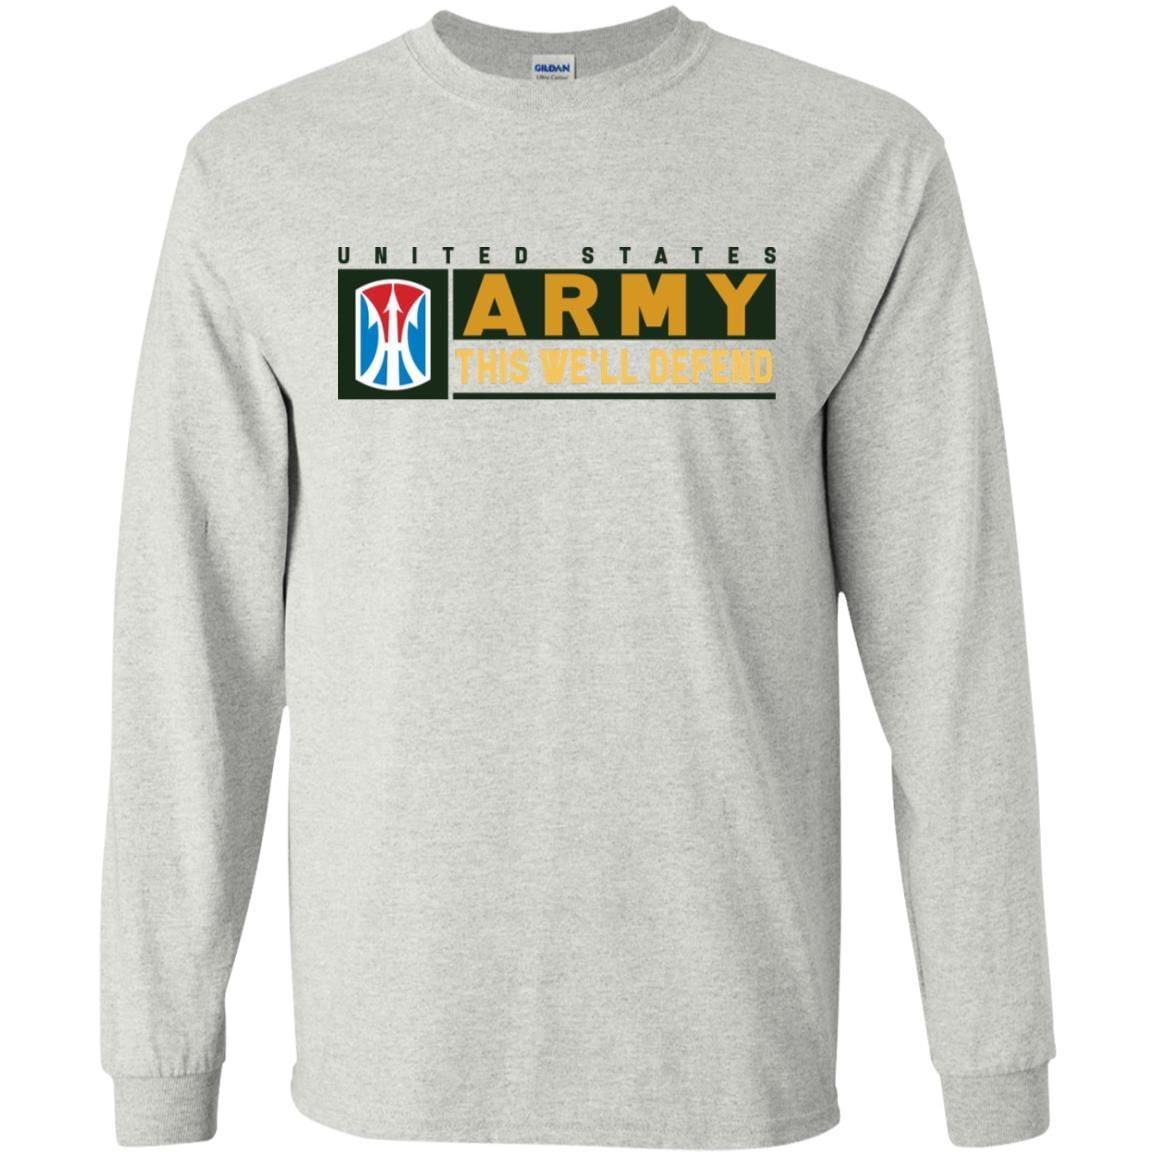 US Army 11TH INFANTRY BRIGADE- This We'll Defend T-Shirt On Front For Men-TShirt-Army-Veterans Nation